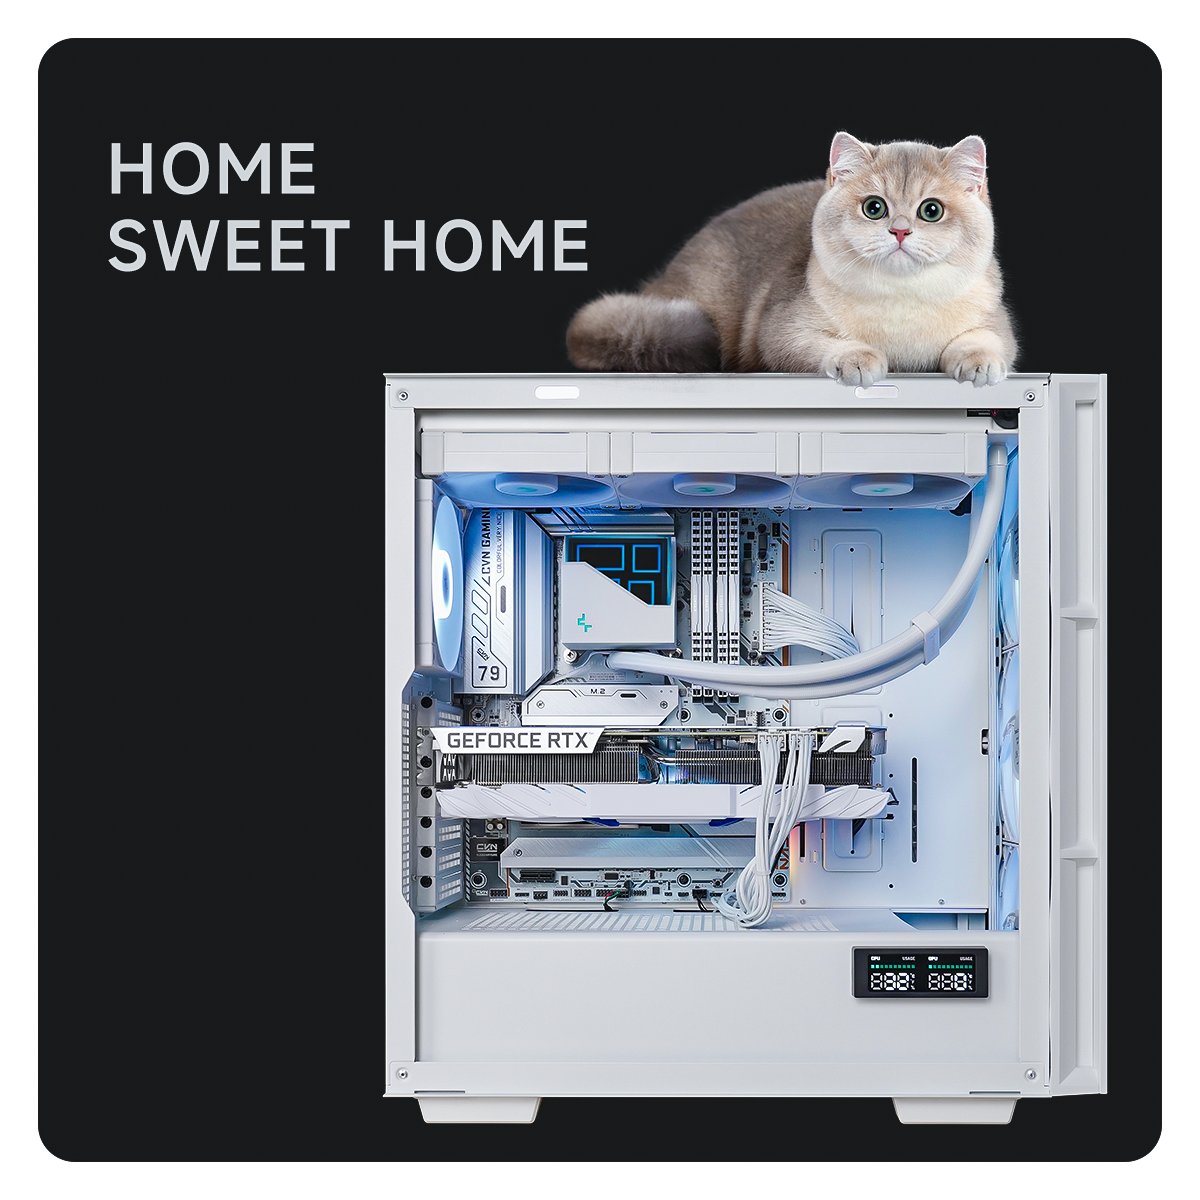 Anyone else's cat love on the case? 🐱🏠

Case: CH560 DIGITAL WH
Liquid Cooler: LT720 WH

#Deepcool #ch560digital #gamingsetup #gamingpc #gamerlife #TechTrends #GamingFun #pcsetup #pcmasterrace #pcgaming #pcgamer #techlover #furryfriends #meme #memes #fyp